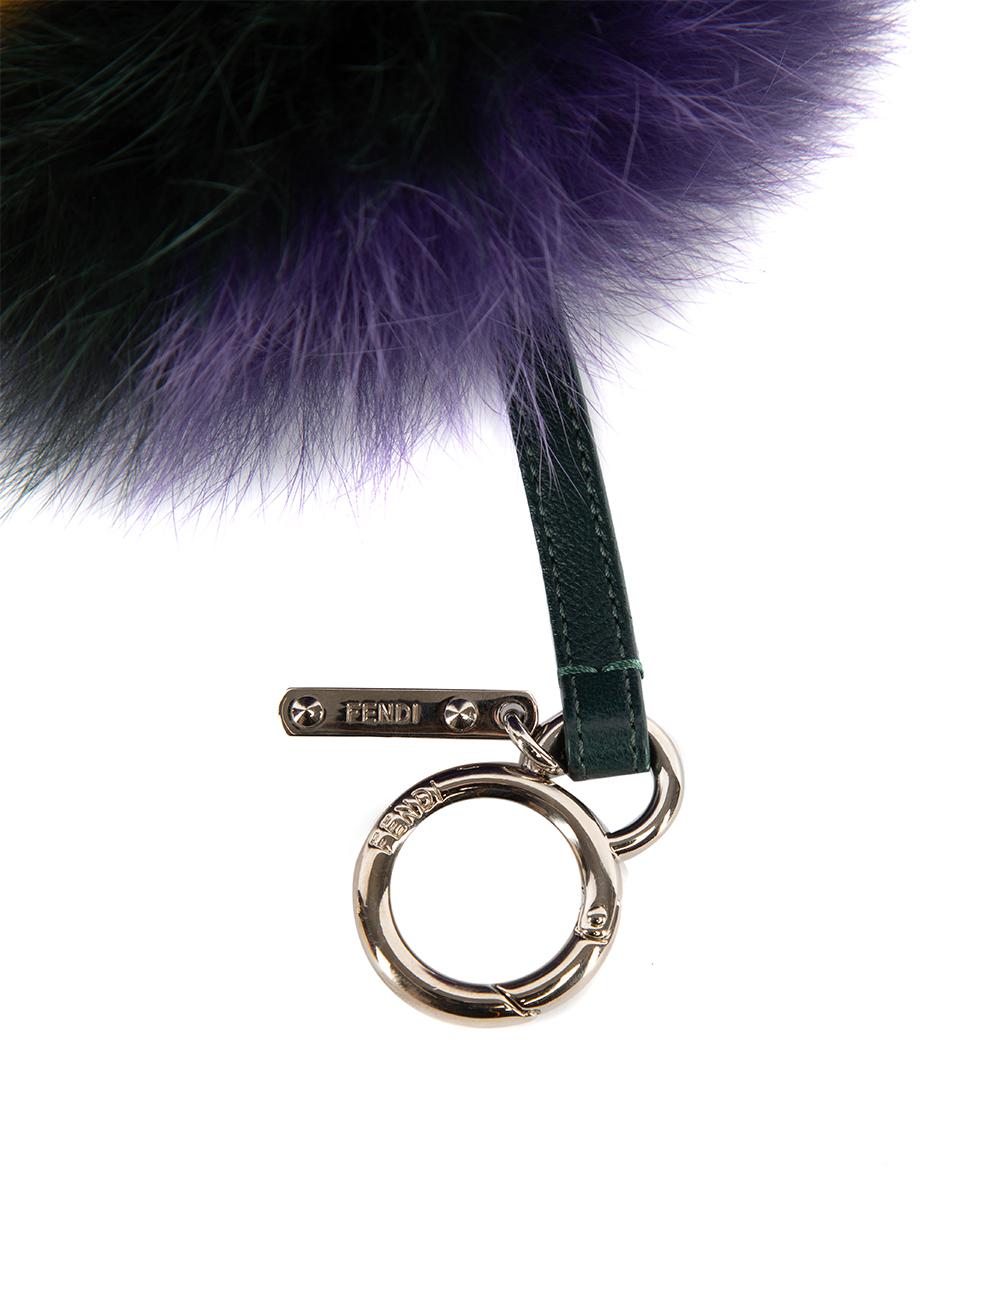 CONDITION is Very good. Hardly any visible wear to keyring is evident on this used Fendi designer resale item. This item includes the original dustbag. Details Multicolour Fox fur Pom pom Leather strap Silver tone clasp and FENDI tag Made in Italy